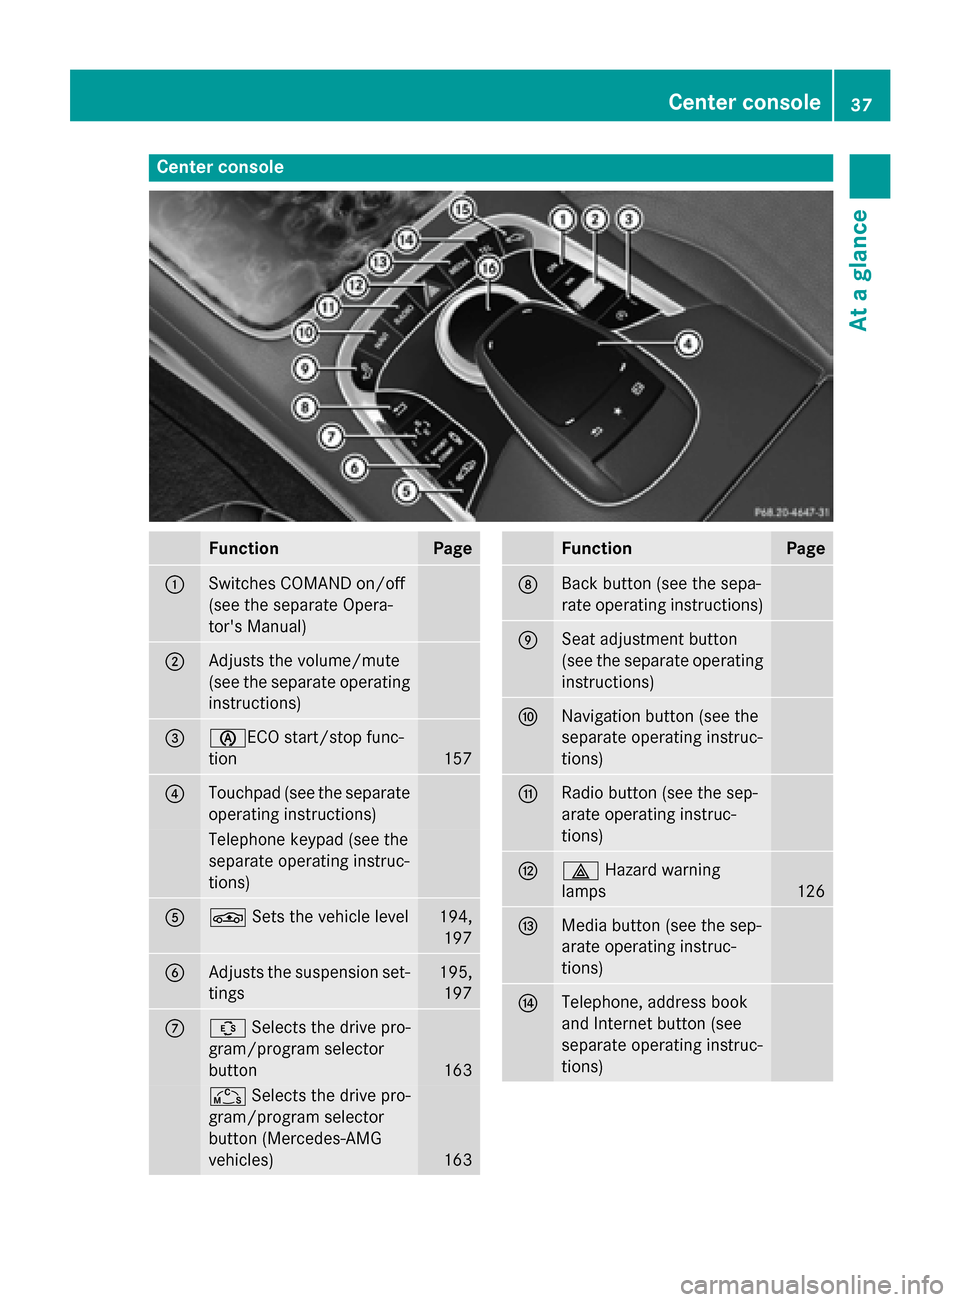 MERCEDES-BENZ S-Class COUPE 2016 C217 Owners Manual Center console
FunctionPage
:Switches COMAND on/off
(see the separate Opera-
tors Manual)
;Adjusts the volume/mute
(see the separate operating
instructions)
=èECO start/stop func-
tion
157
?Touchpad